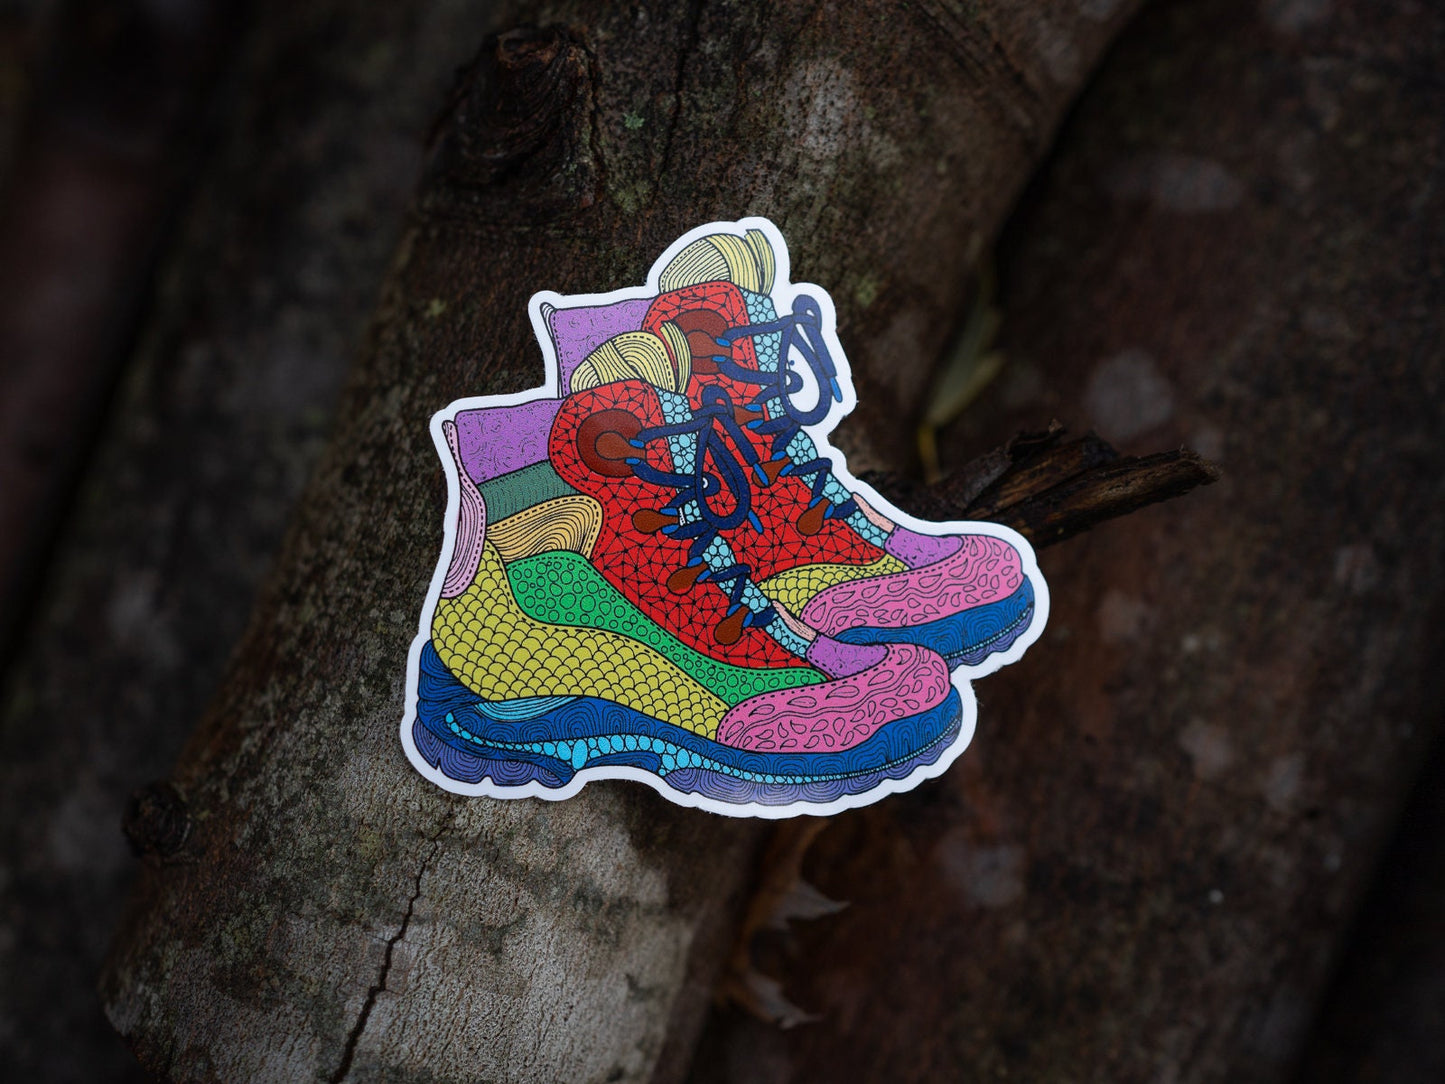 Hiking Boots Vinyl Sticker, Vinyl Decal, Laptop Sticker, Camping Sticker, Gifts For Campers, RV Life, Outdoors